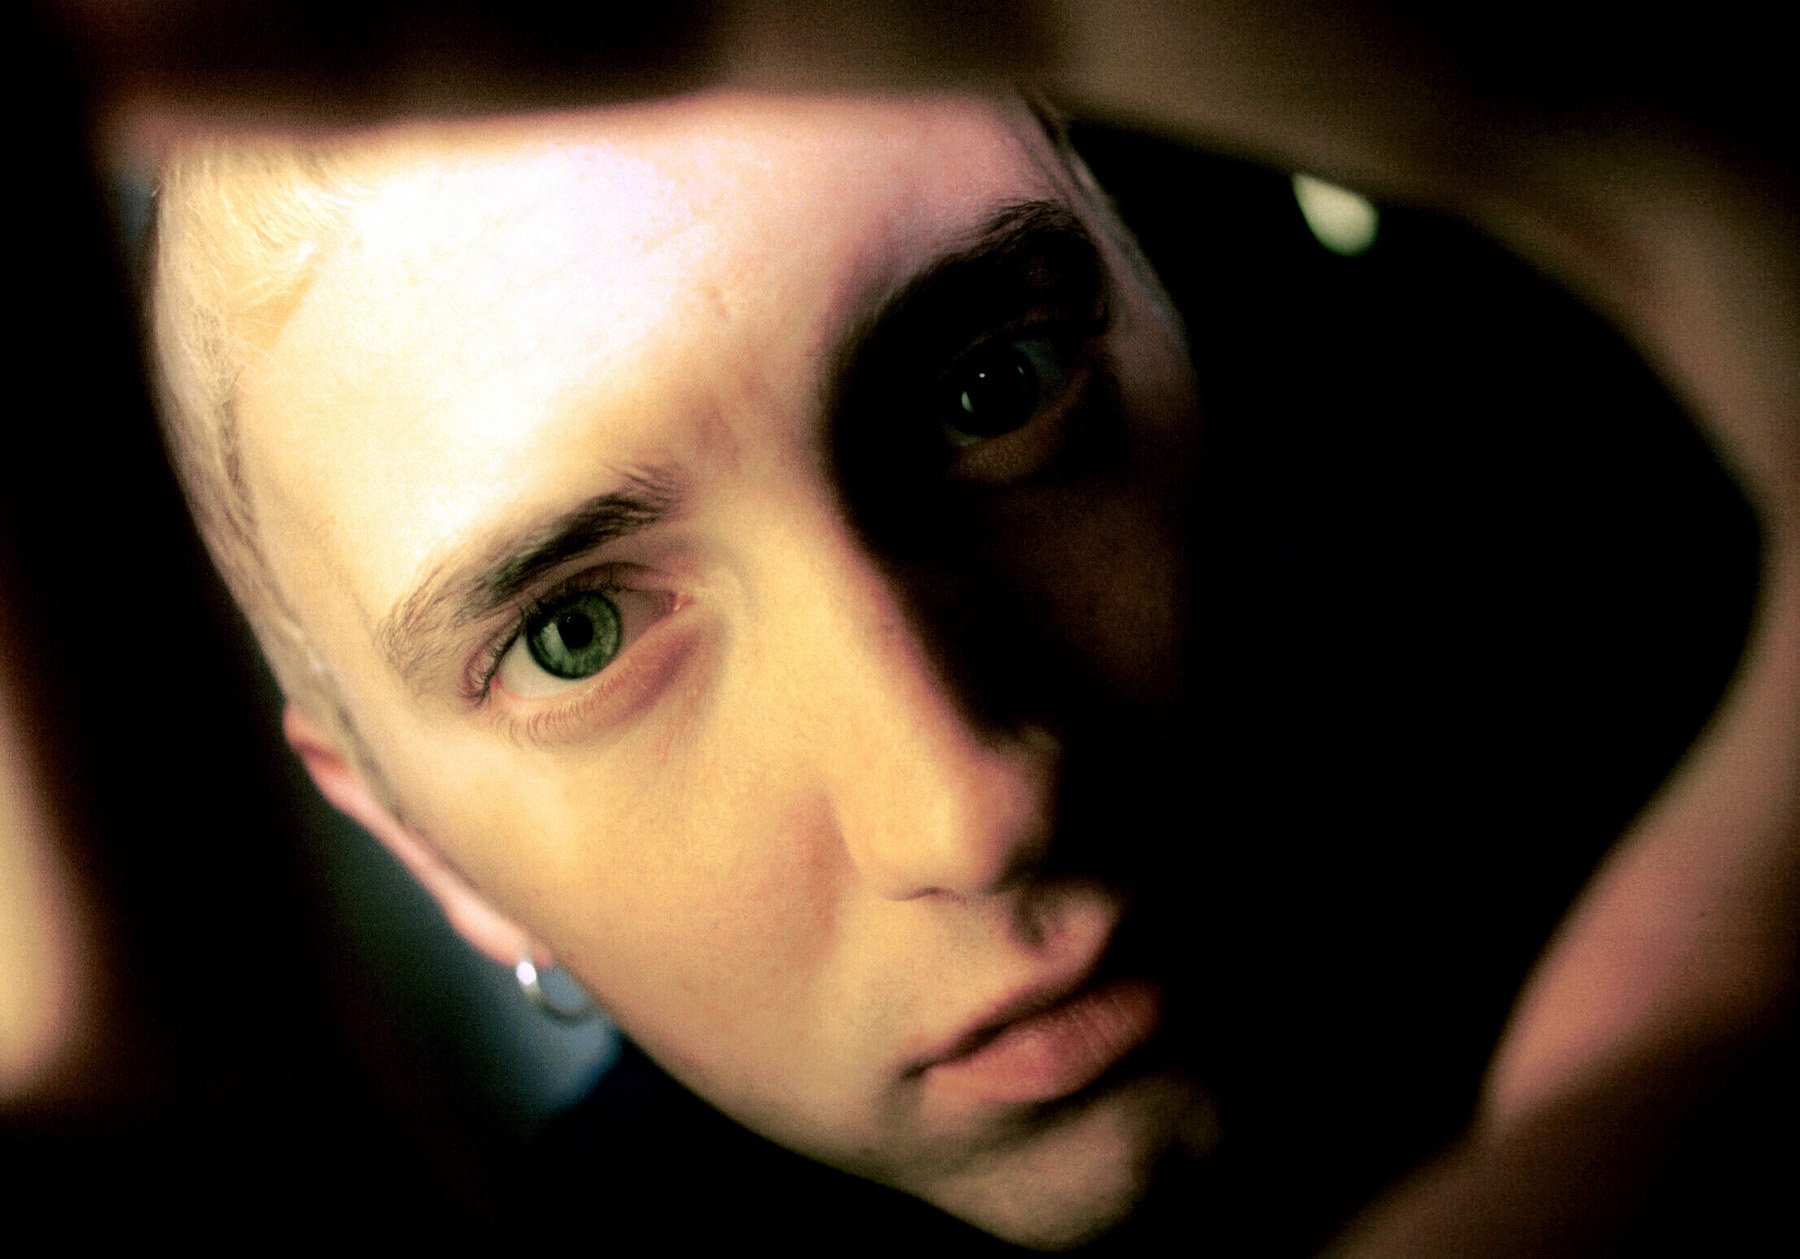 Close-up photo of Eminem, who released his debut album 'Infinite' in 1996